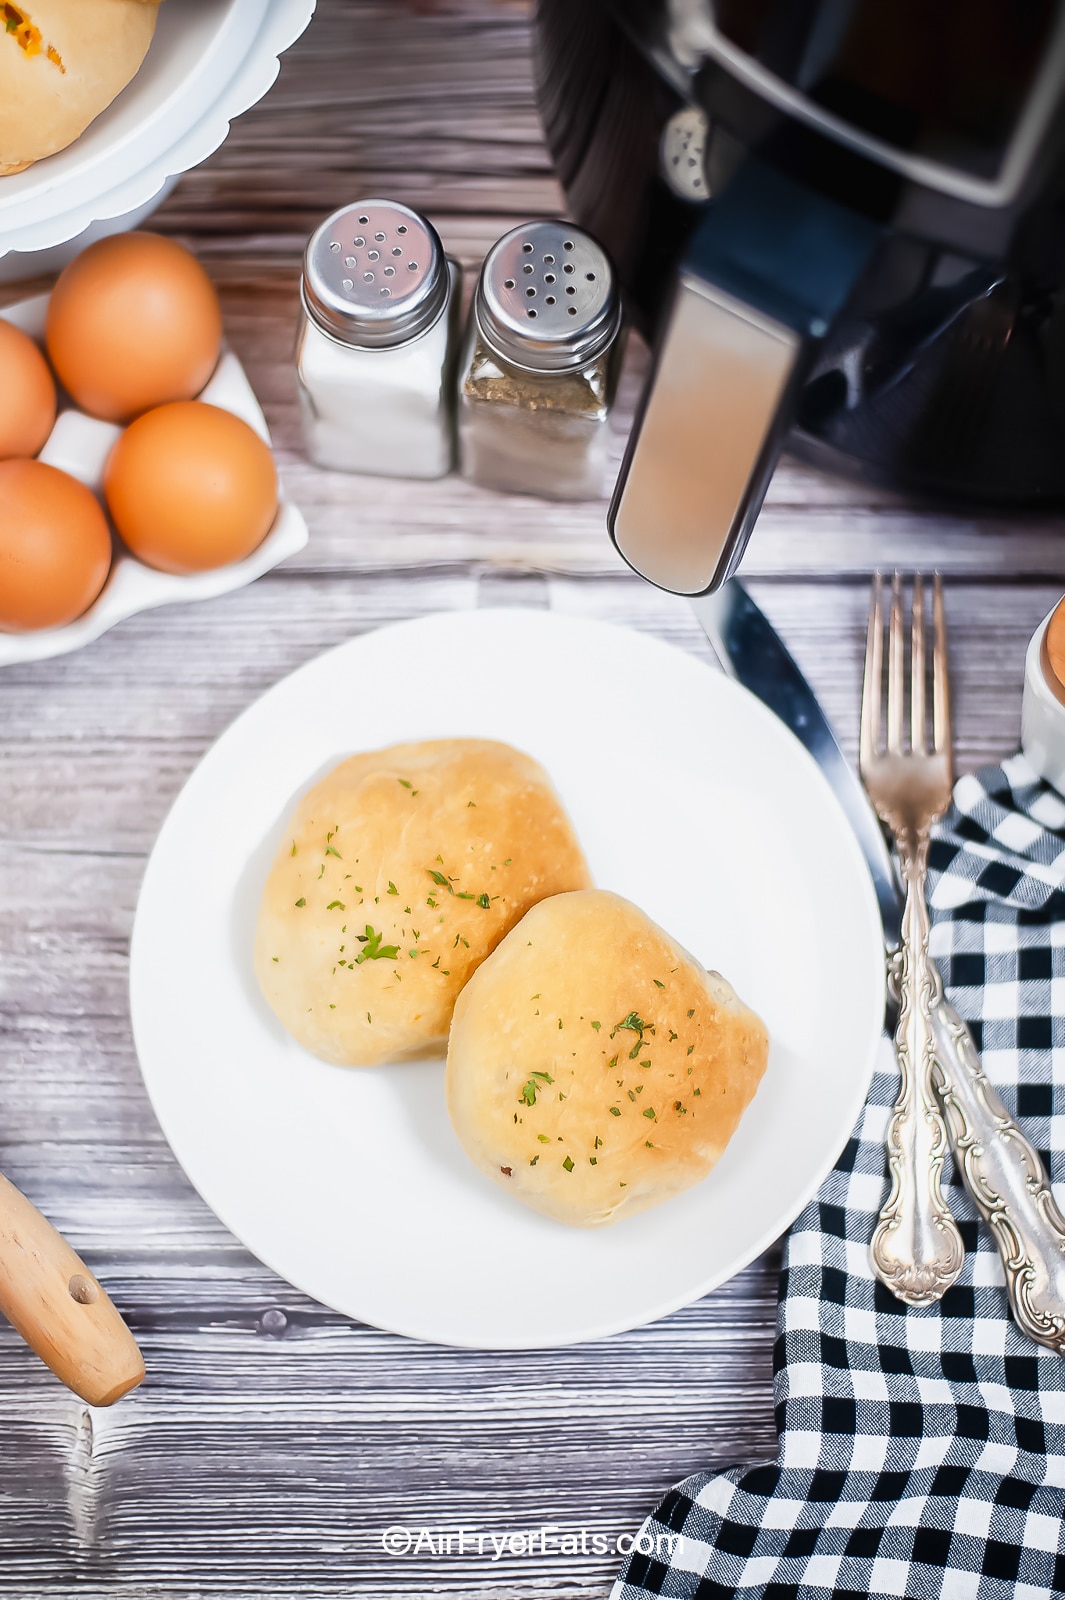 Overhead shot of two egg and bacon stuffed biscuits on a white plate. There is a black air fryer in the background with a silver handle, a packet of eggs and a knife & fork to the right of the plate